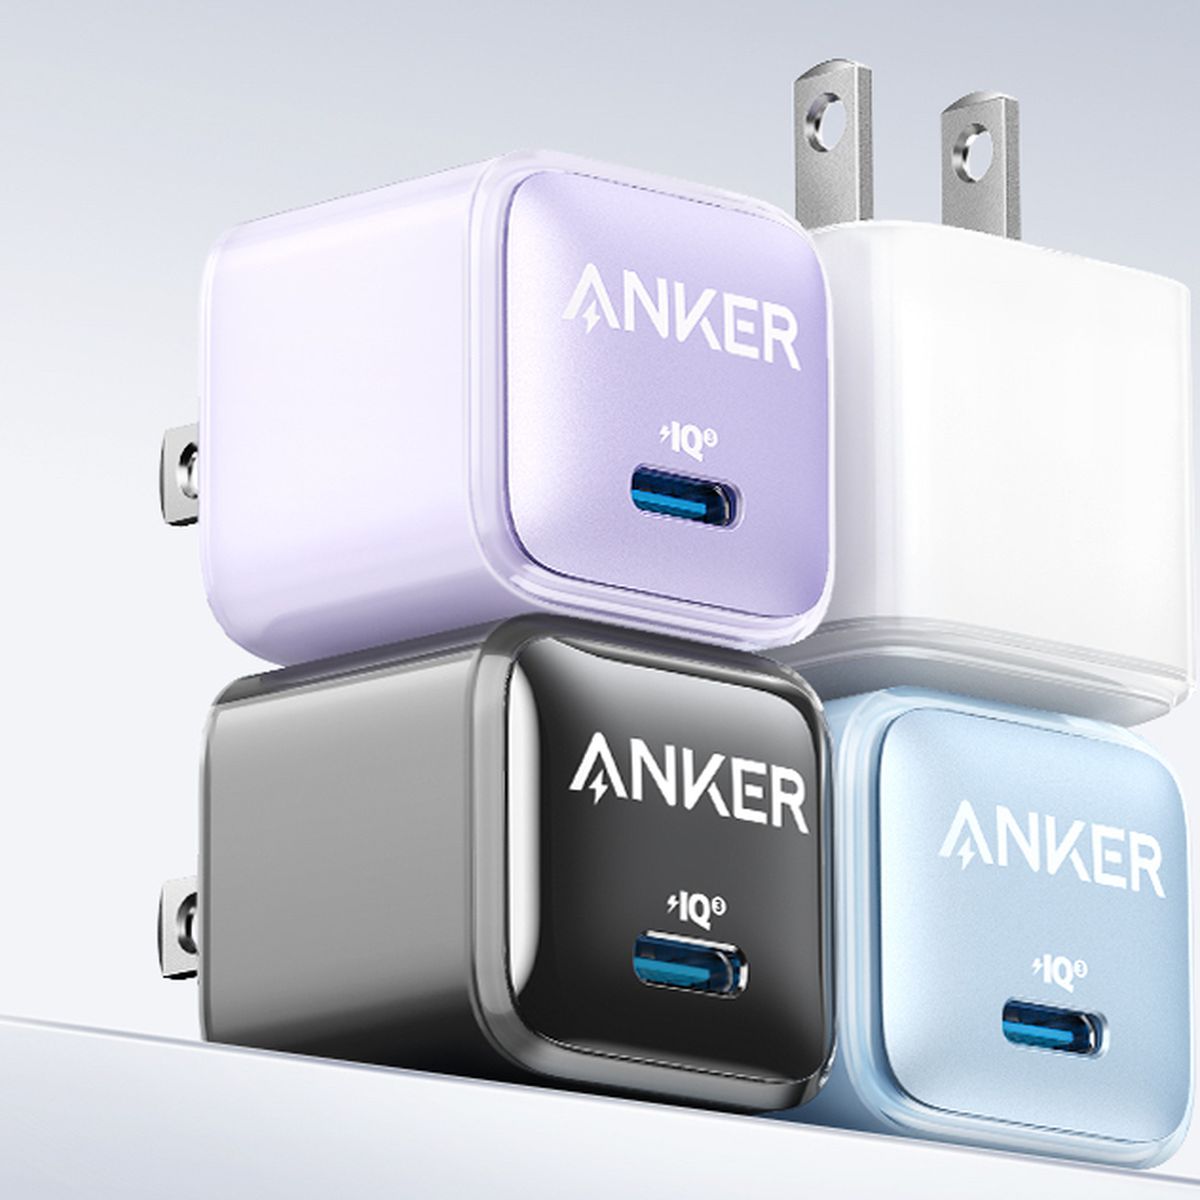 Anker Refreshes Its 20W Adapter Lineup With Colorful Anker Nano